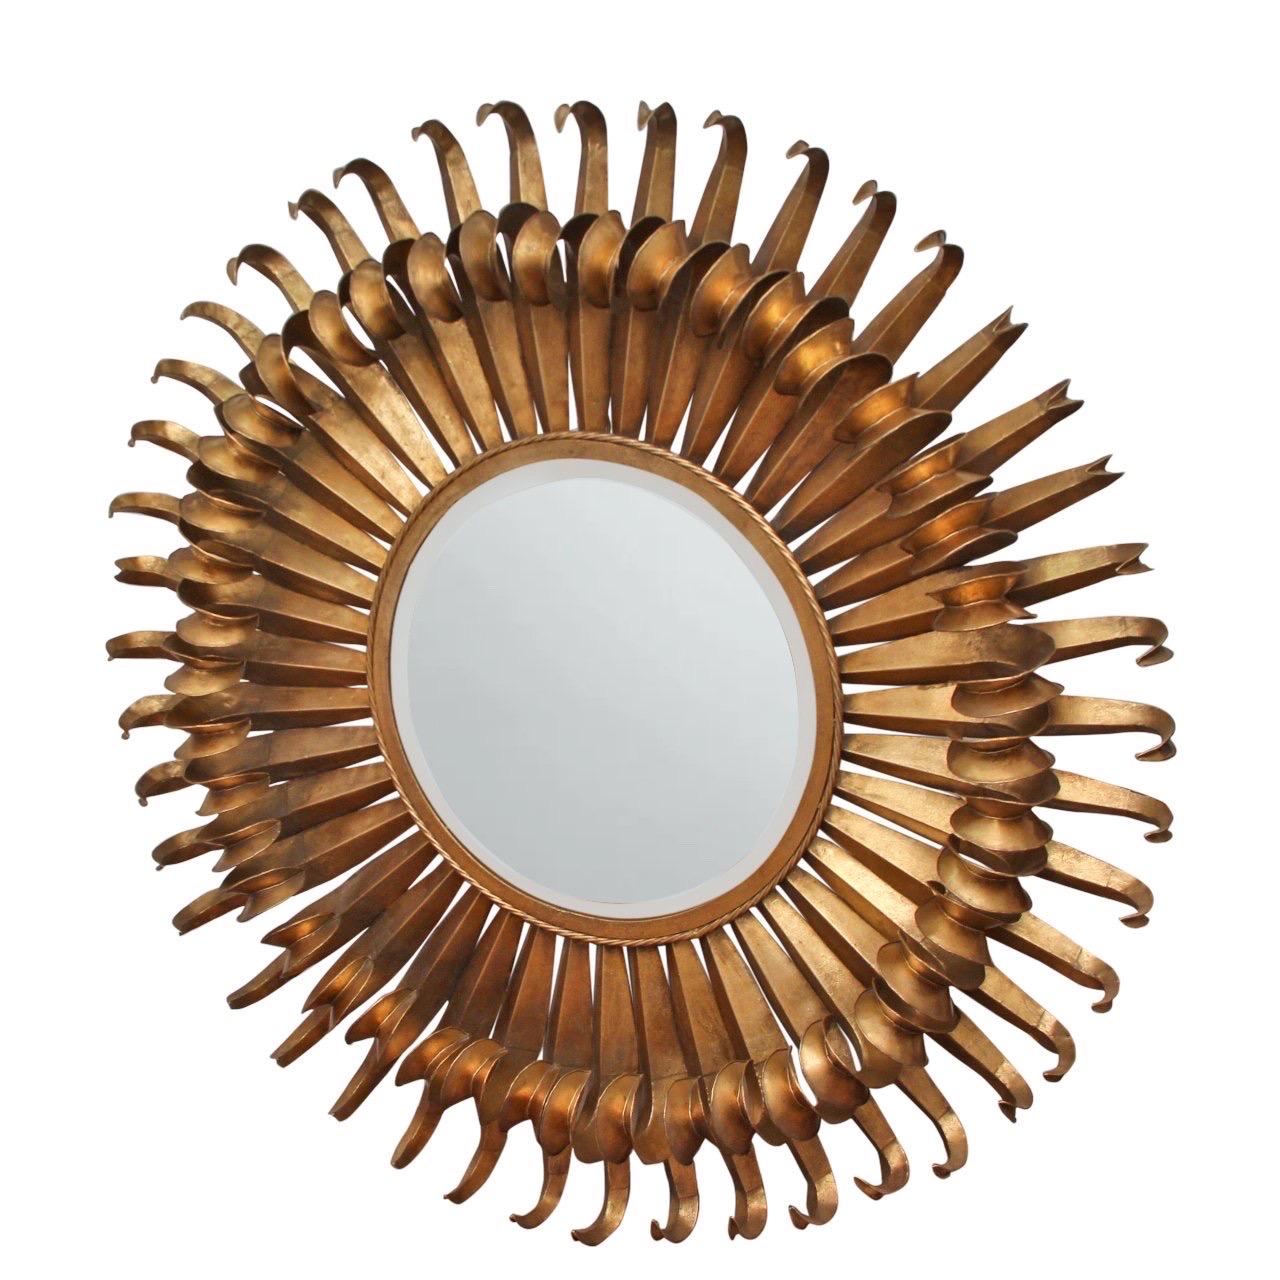 Very large starburst mirror crafted of iron.  

France, circa 1950.

Features alternating rays with original gold leaf gilding and original aged patina.

Dimensions: 50” W x 6” D / Mirror: 20” W